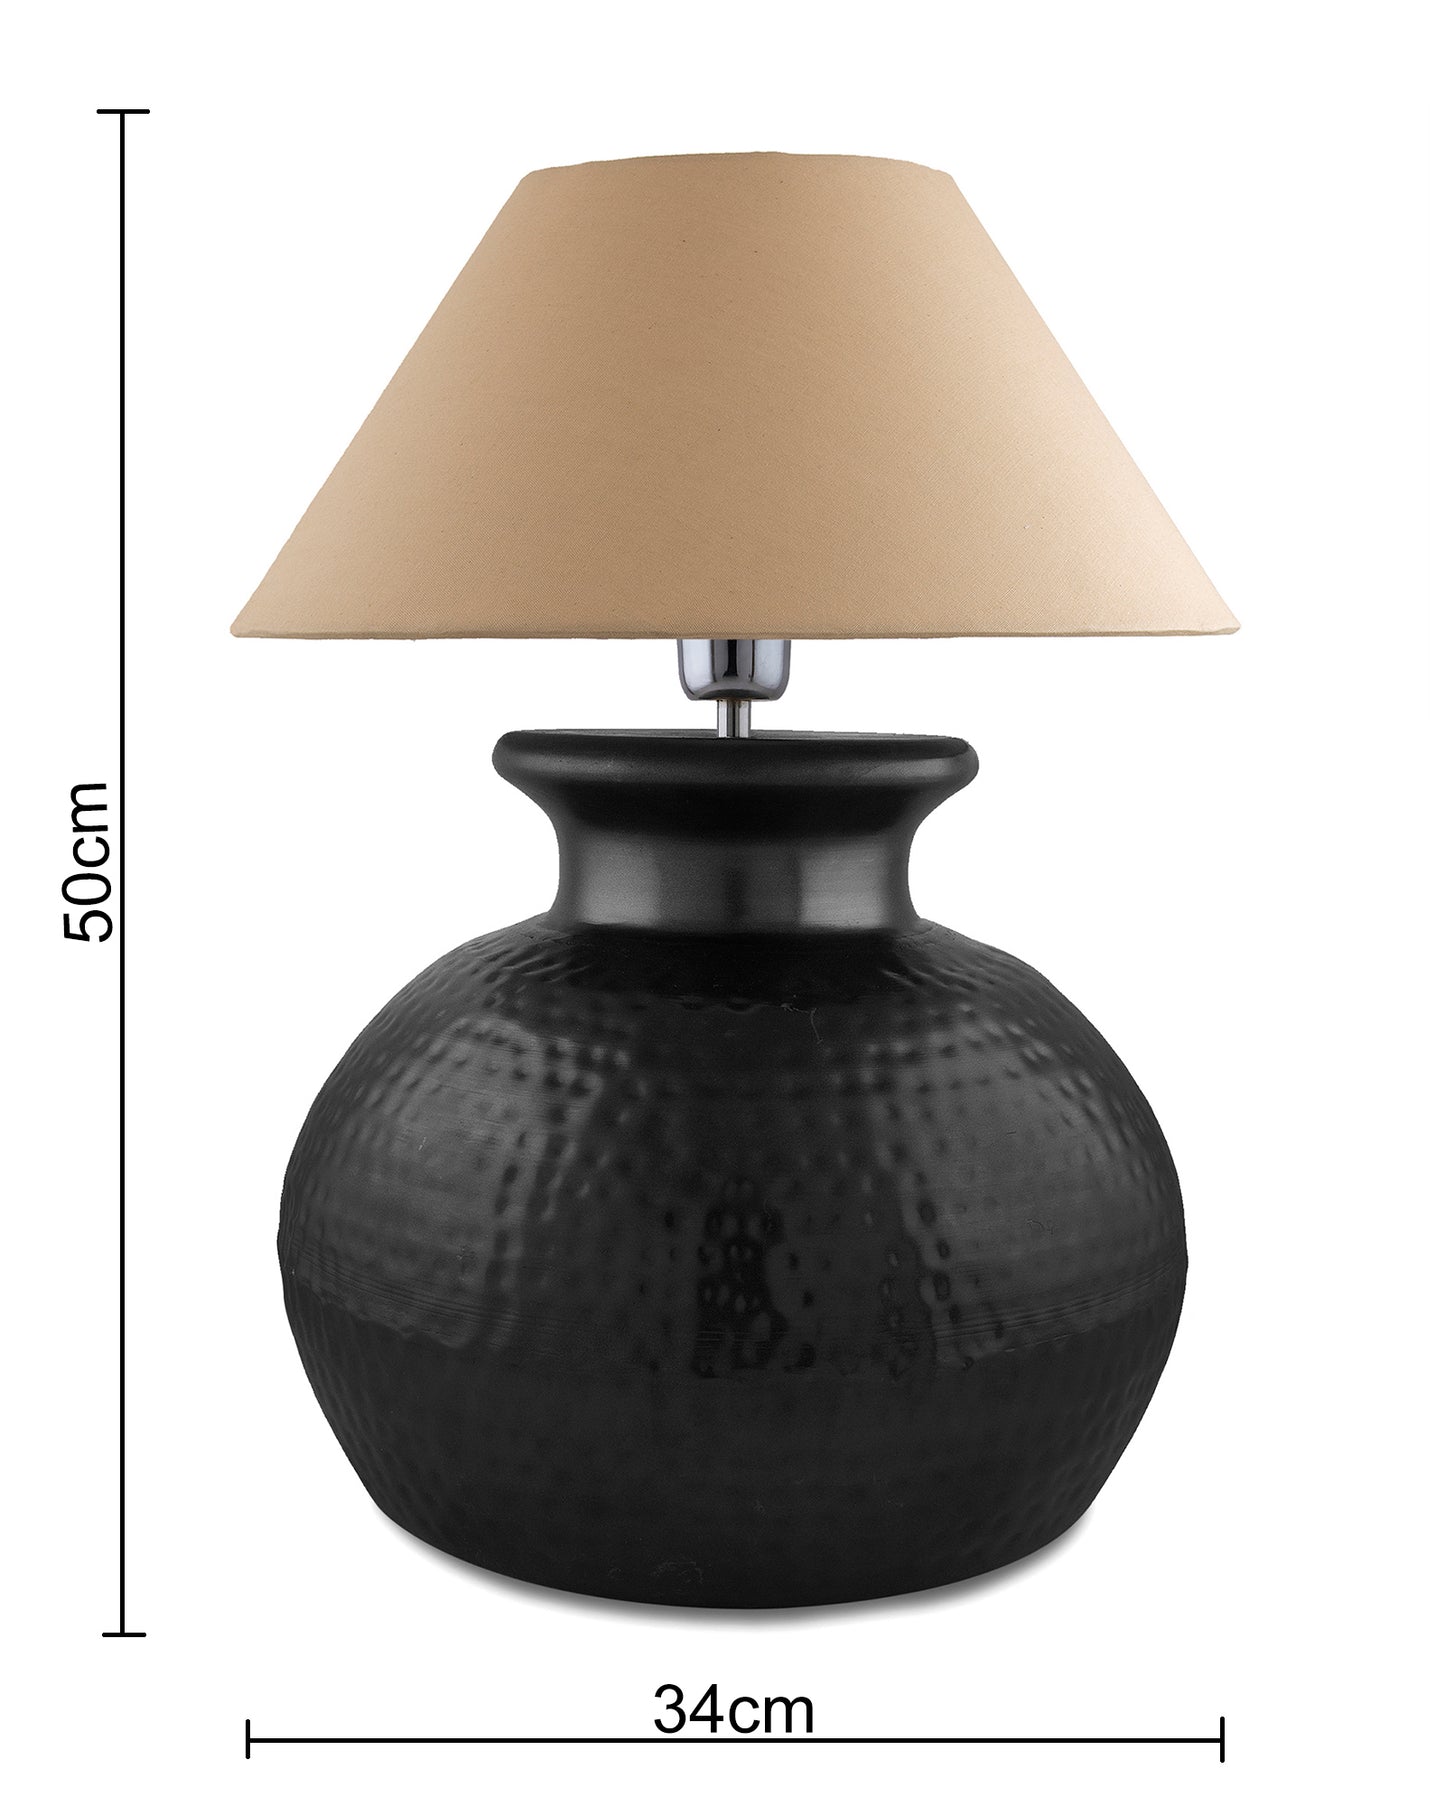 Matt Black Hammered Pitcher Table Lamp with Cone Shade